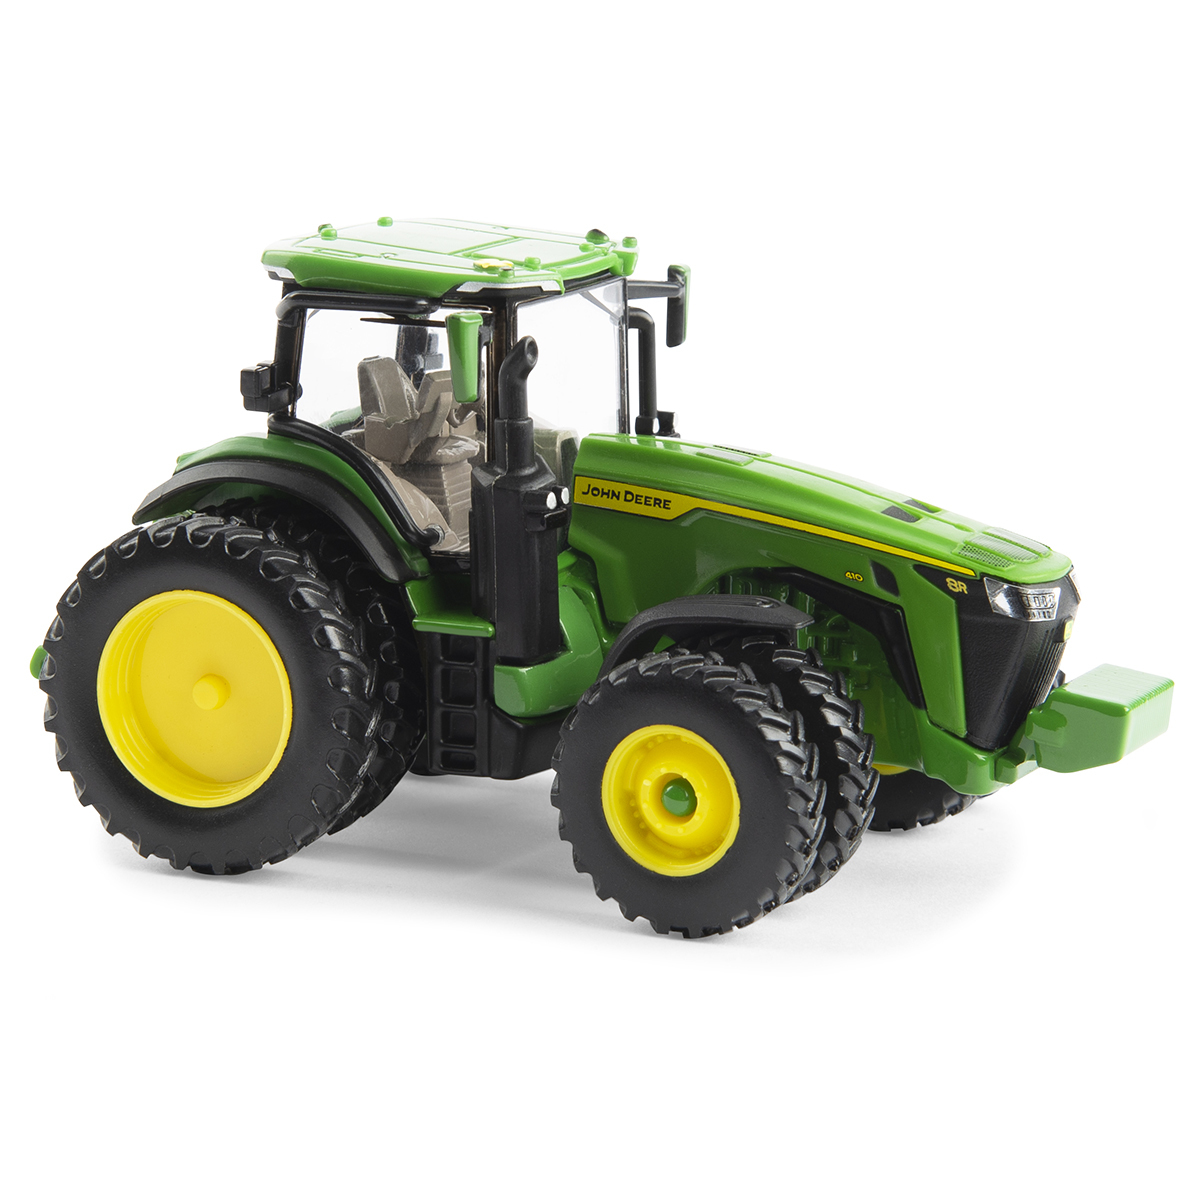 1/64 Special Edition John Deere 8R 370 Tractor with duals 